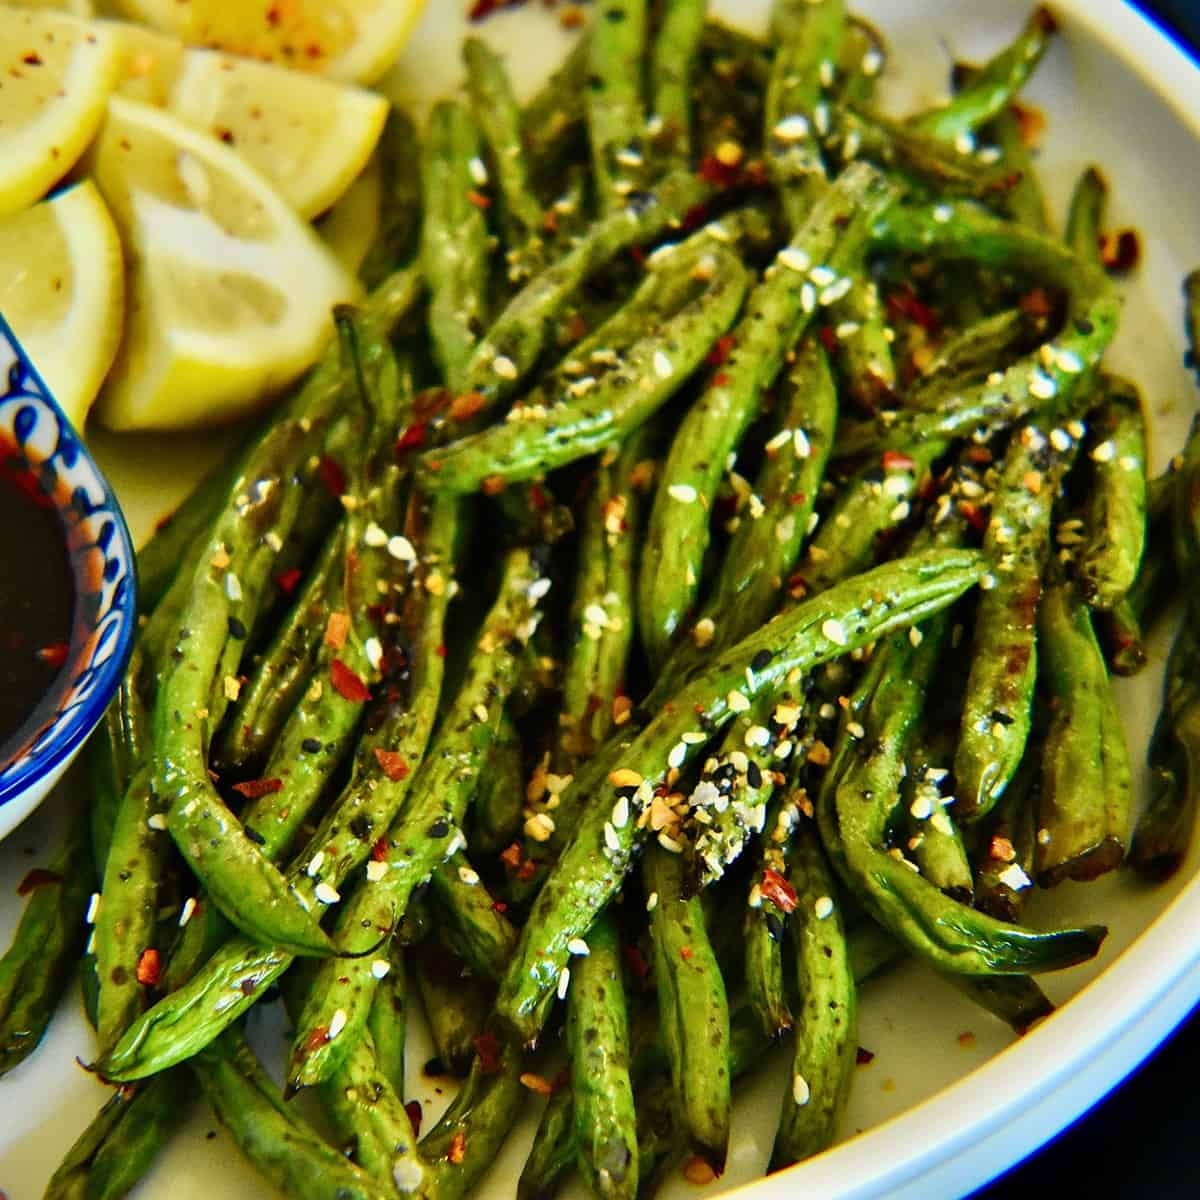 green beans in the air fryer are served on a white plate and served with lemon wedges and a sweet and spicy chili sauce.